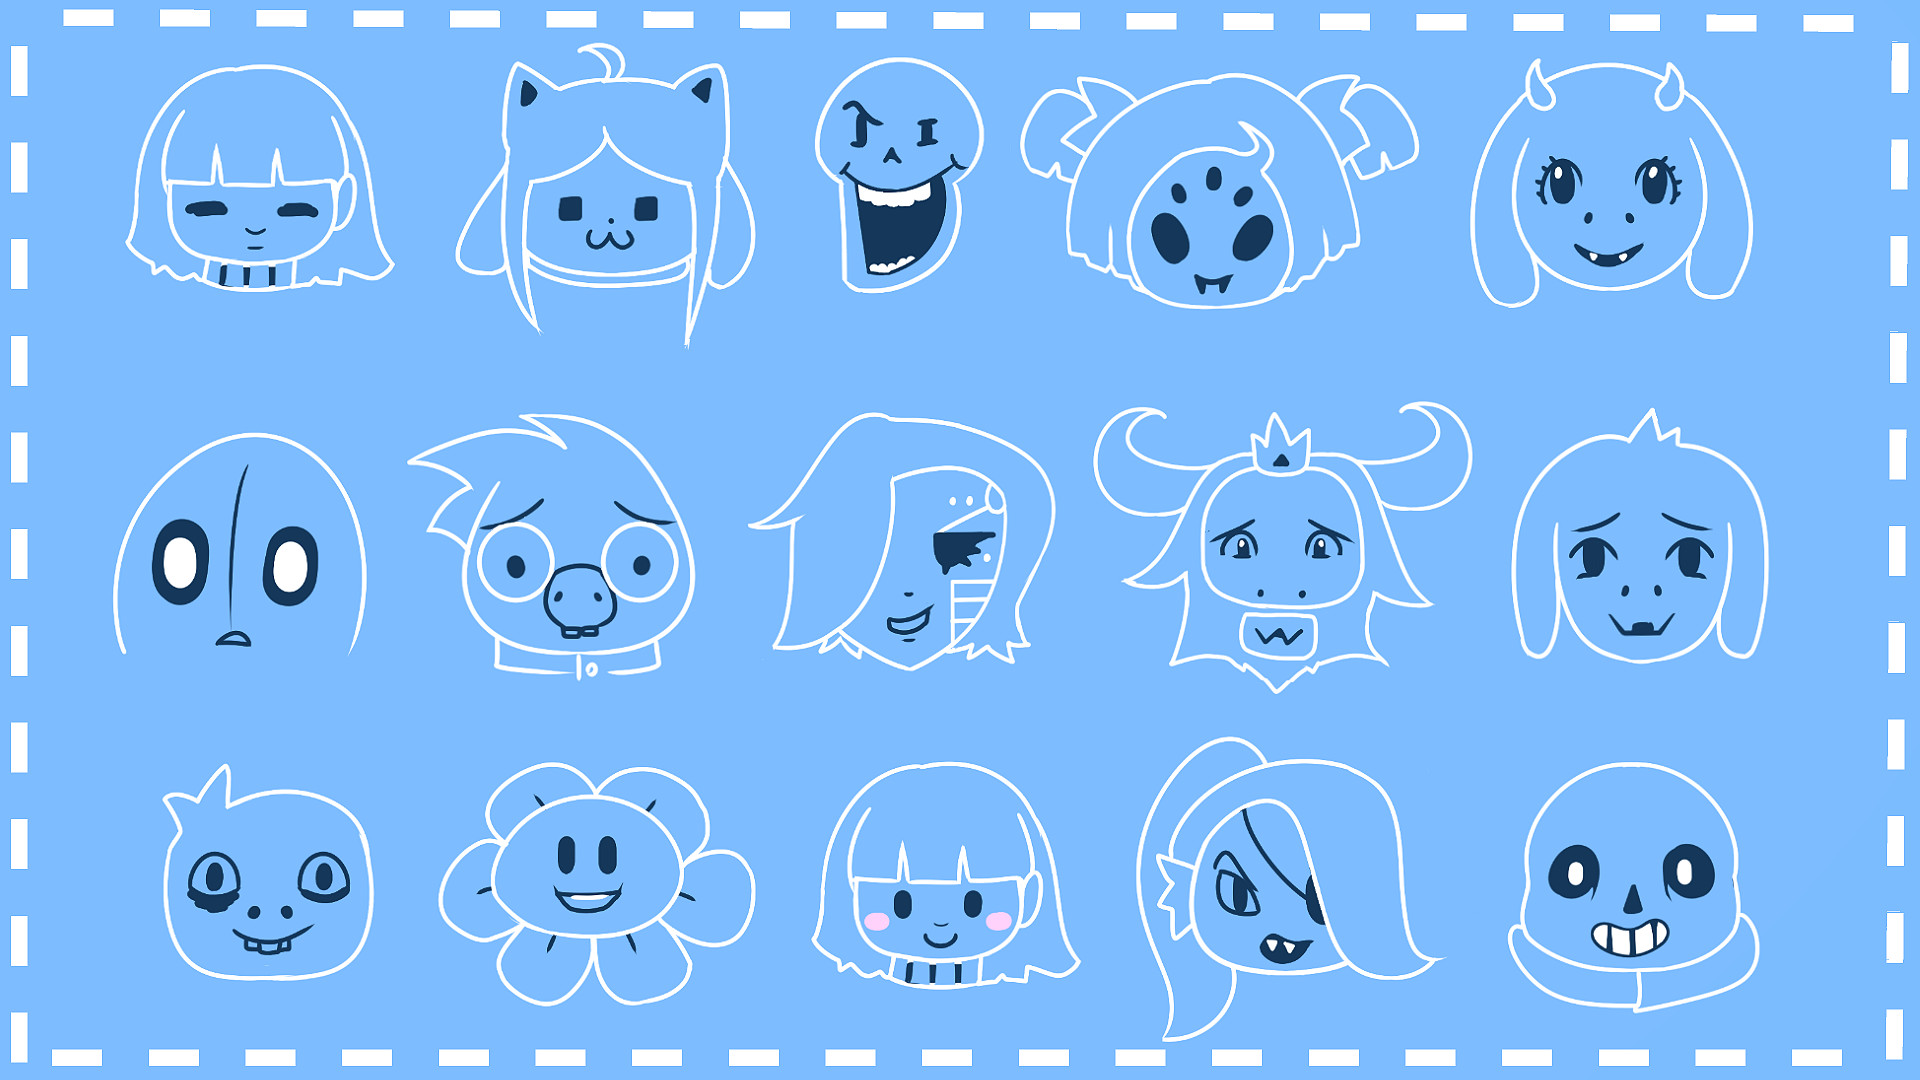 1920x1080 High Quality Undertale Images Collection for Desktop